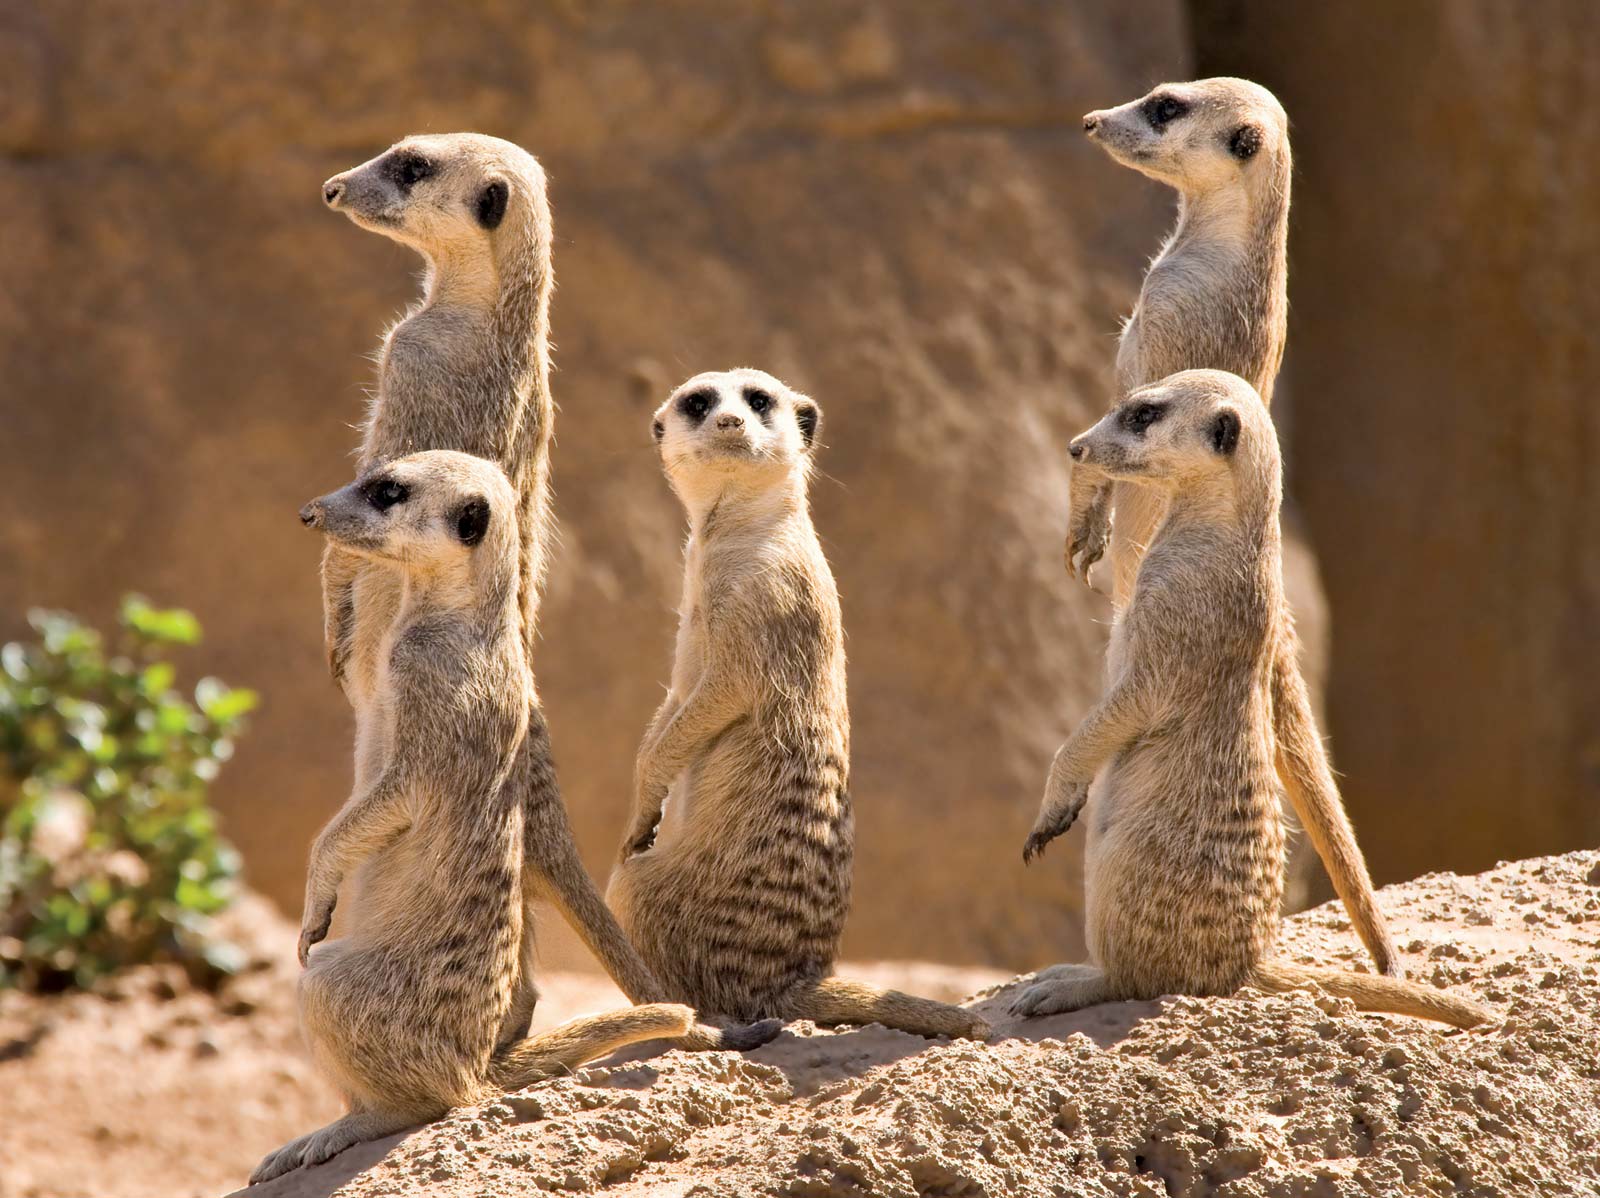 This Animal Quiz Might Not Be Hardest 1 You've Ever Taken, But It Certainly Isn't Easy meerkats